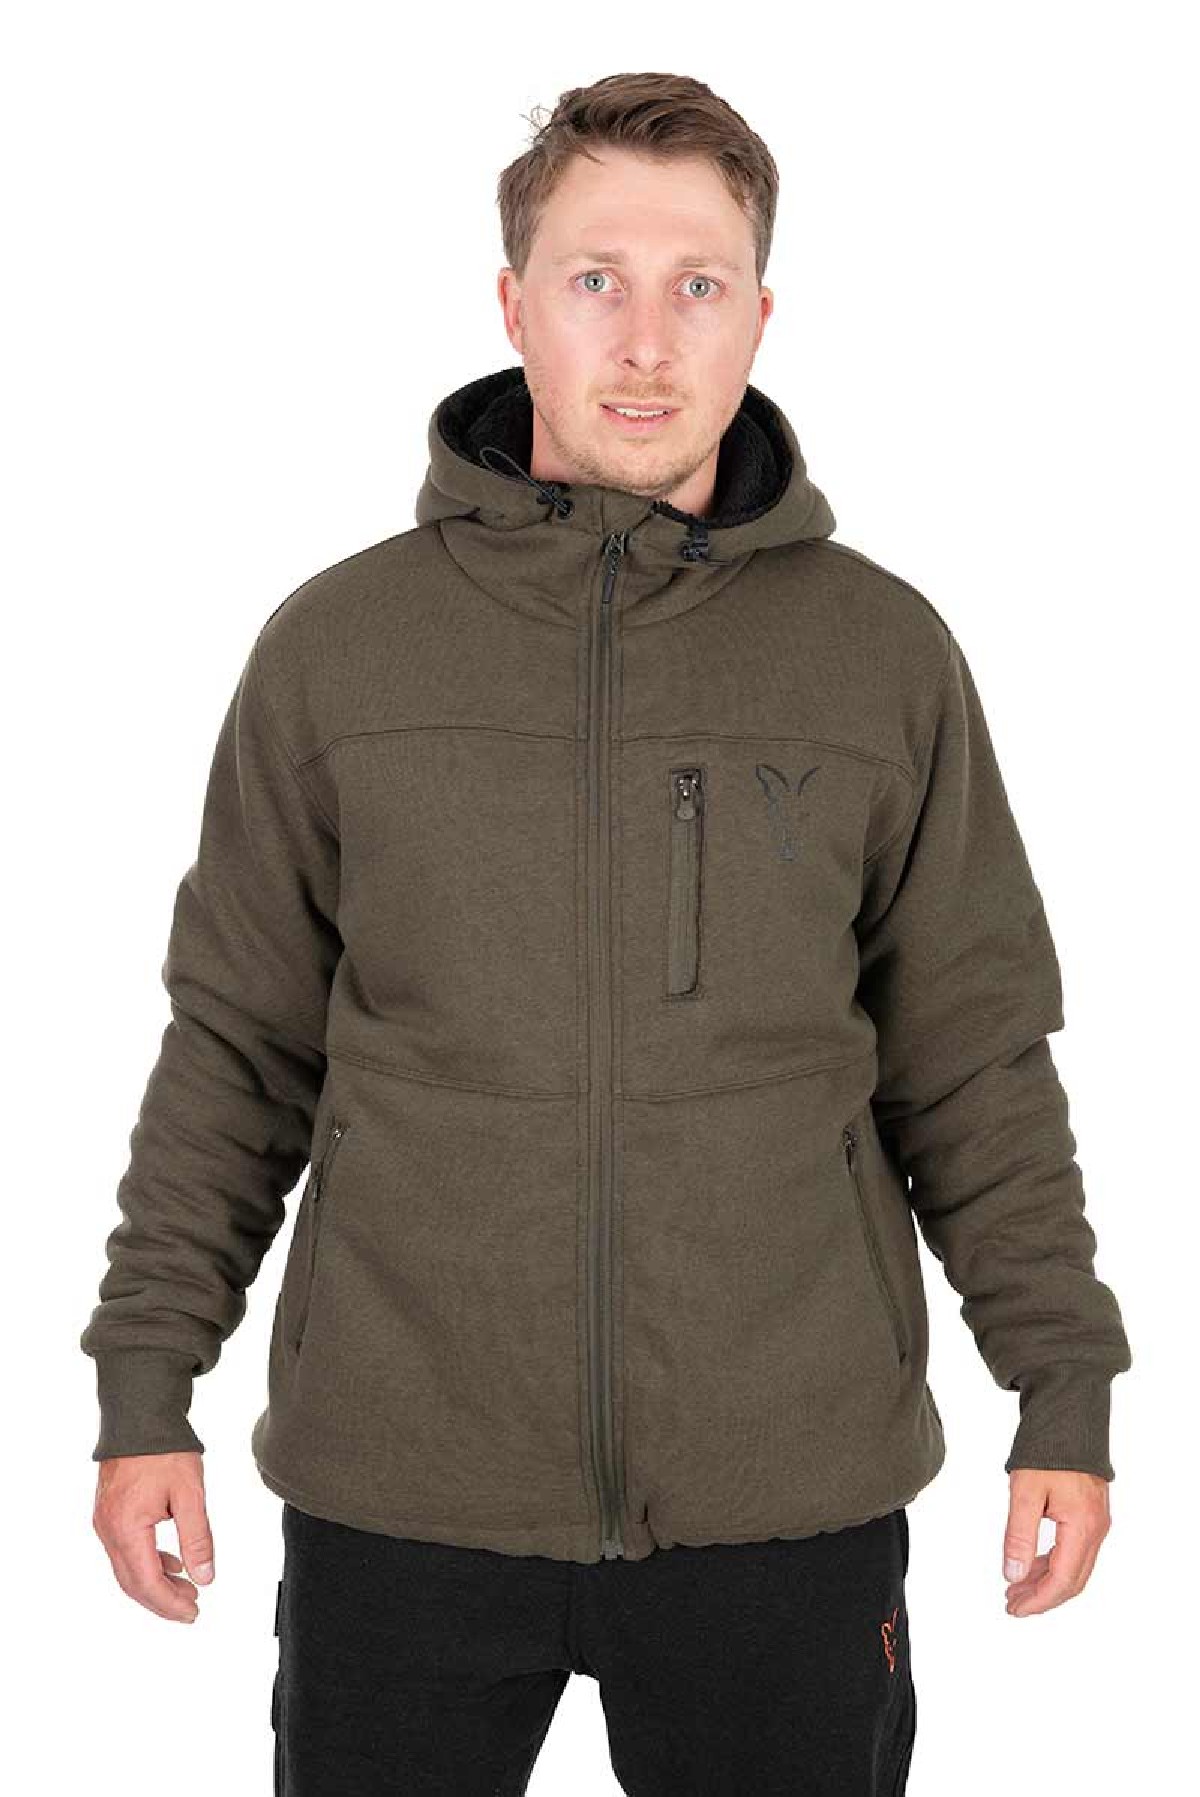 Fox Collection Sherpa Jacket Green & Black XXX-Large